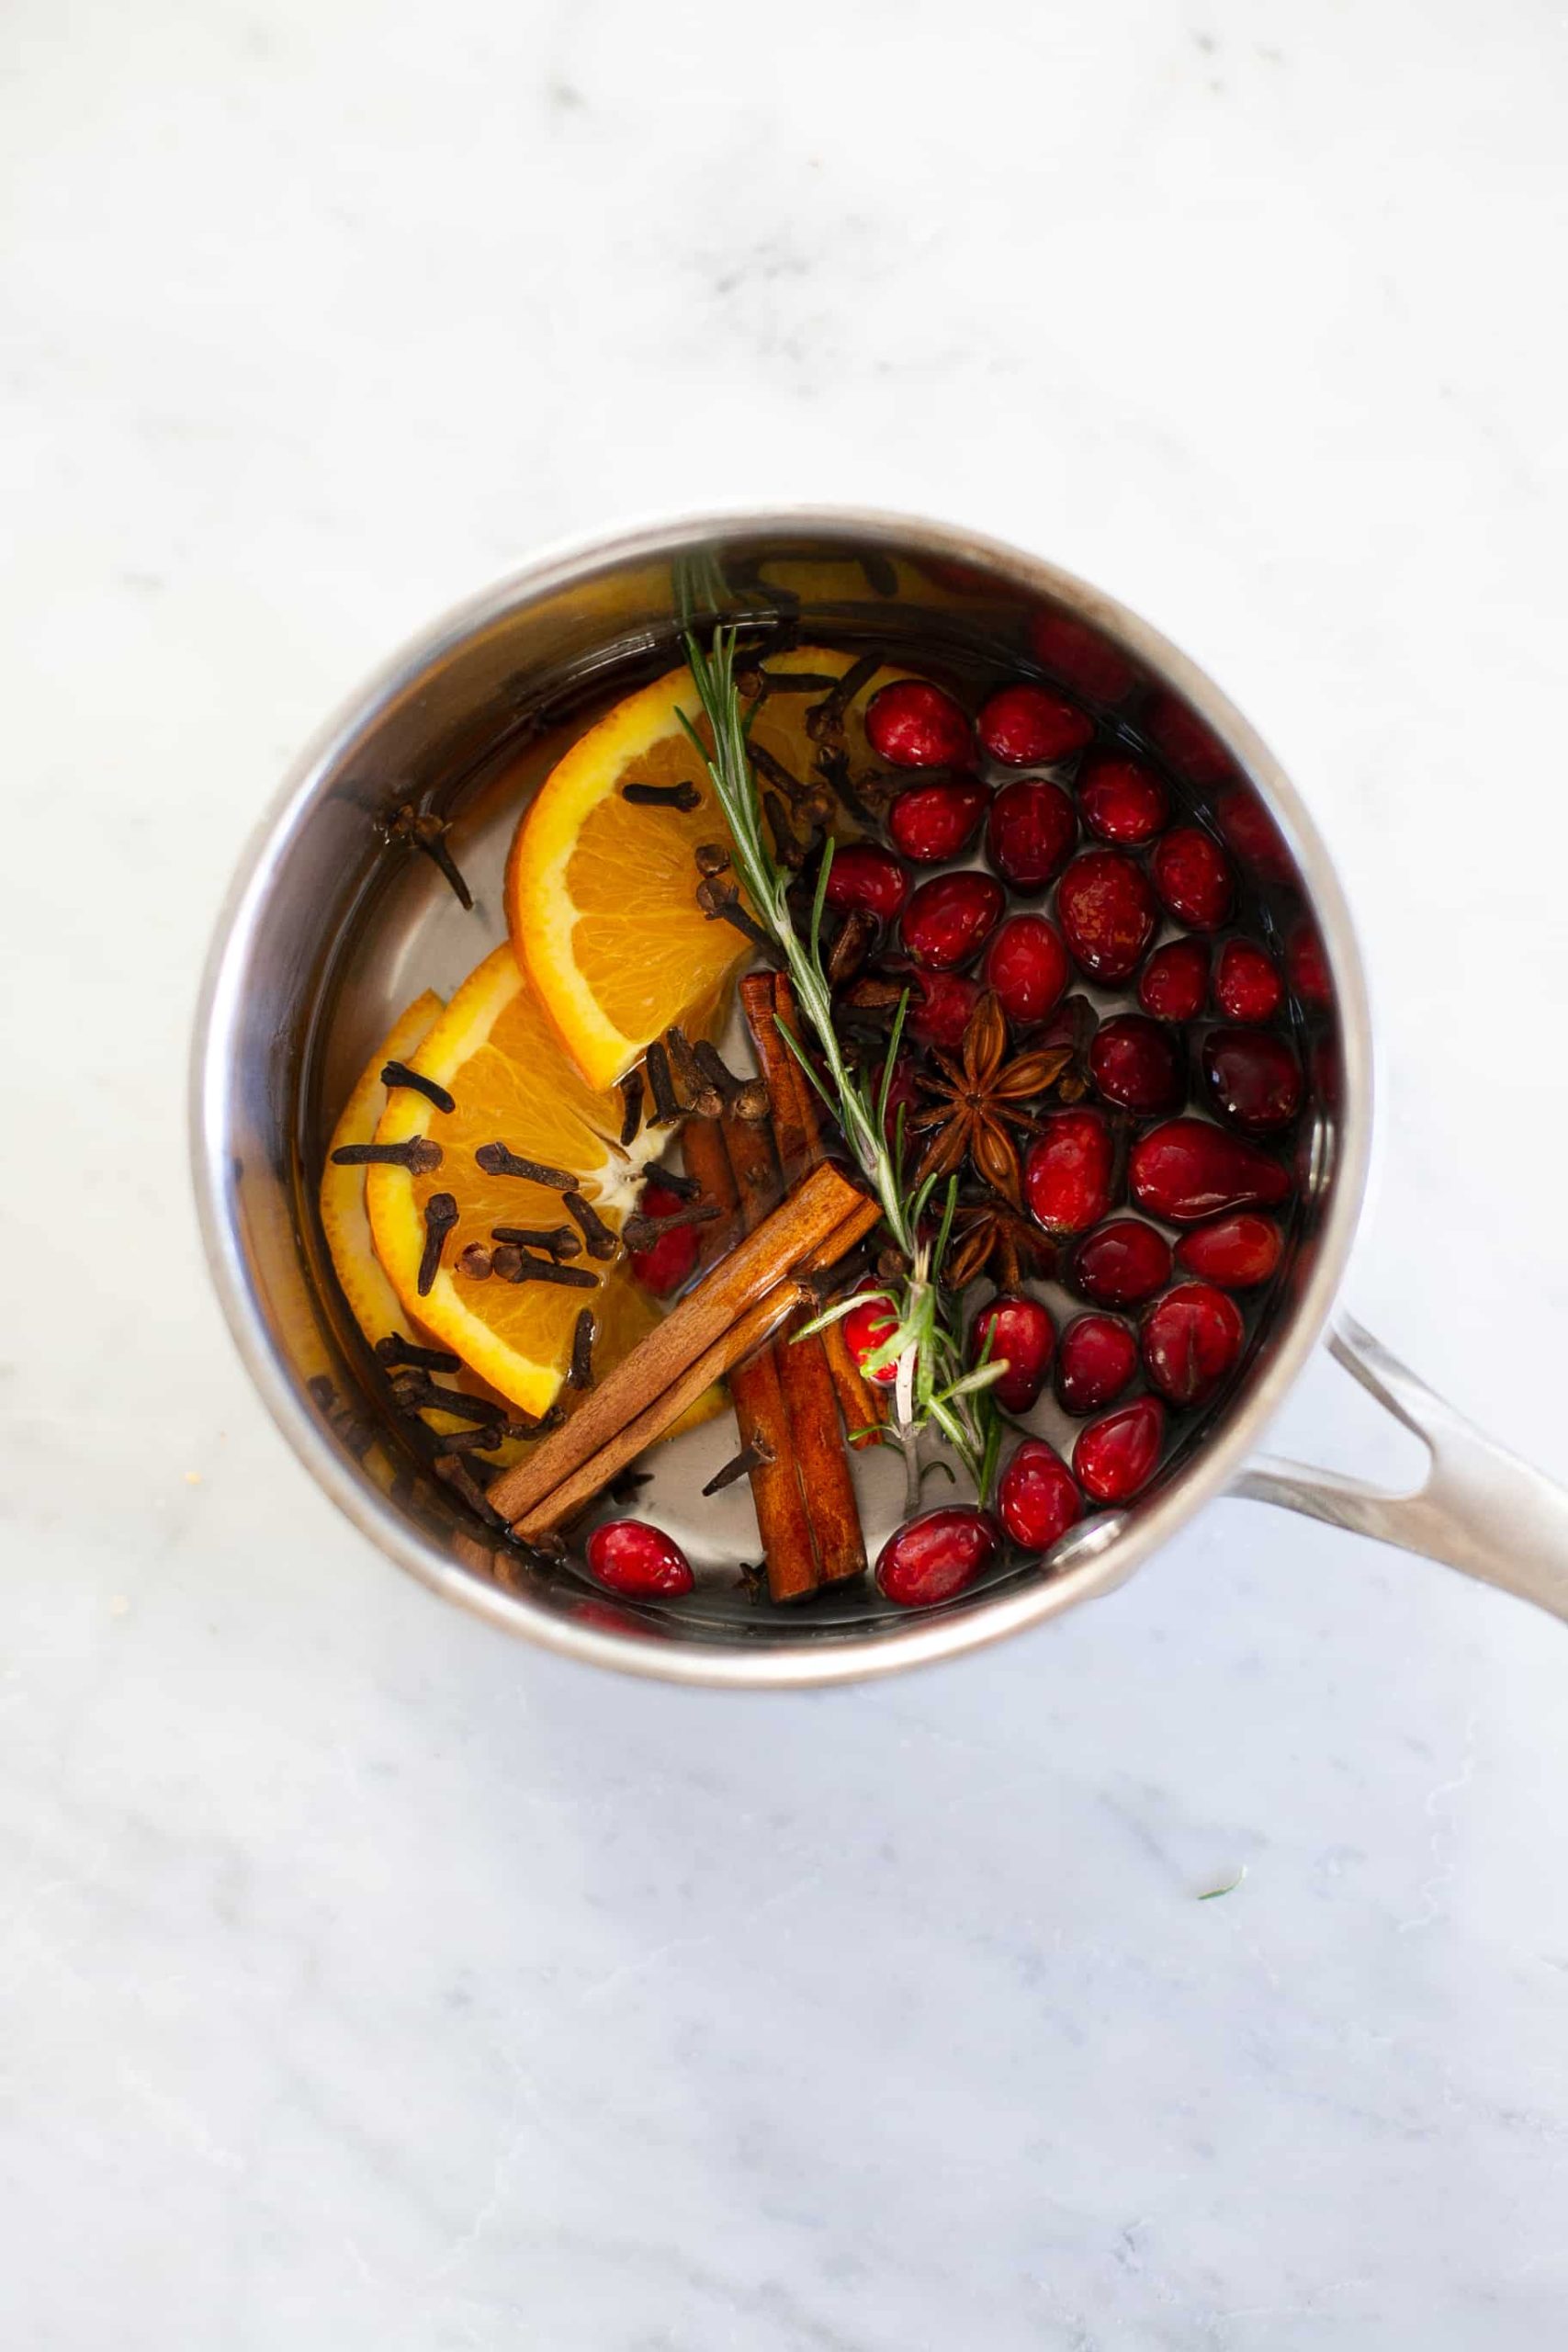 Holiday Simmer Recipes to Make Your Home Smell Cozy